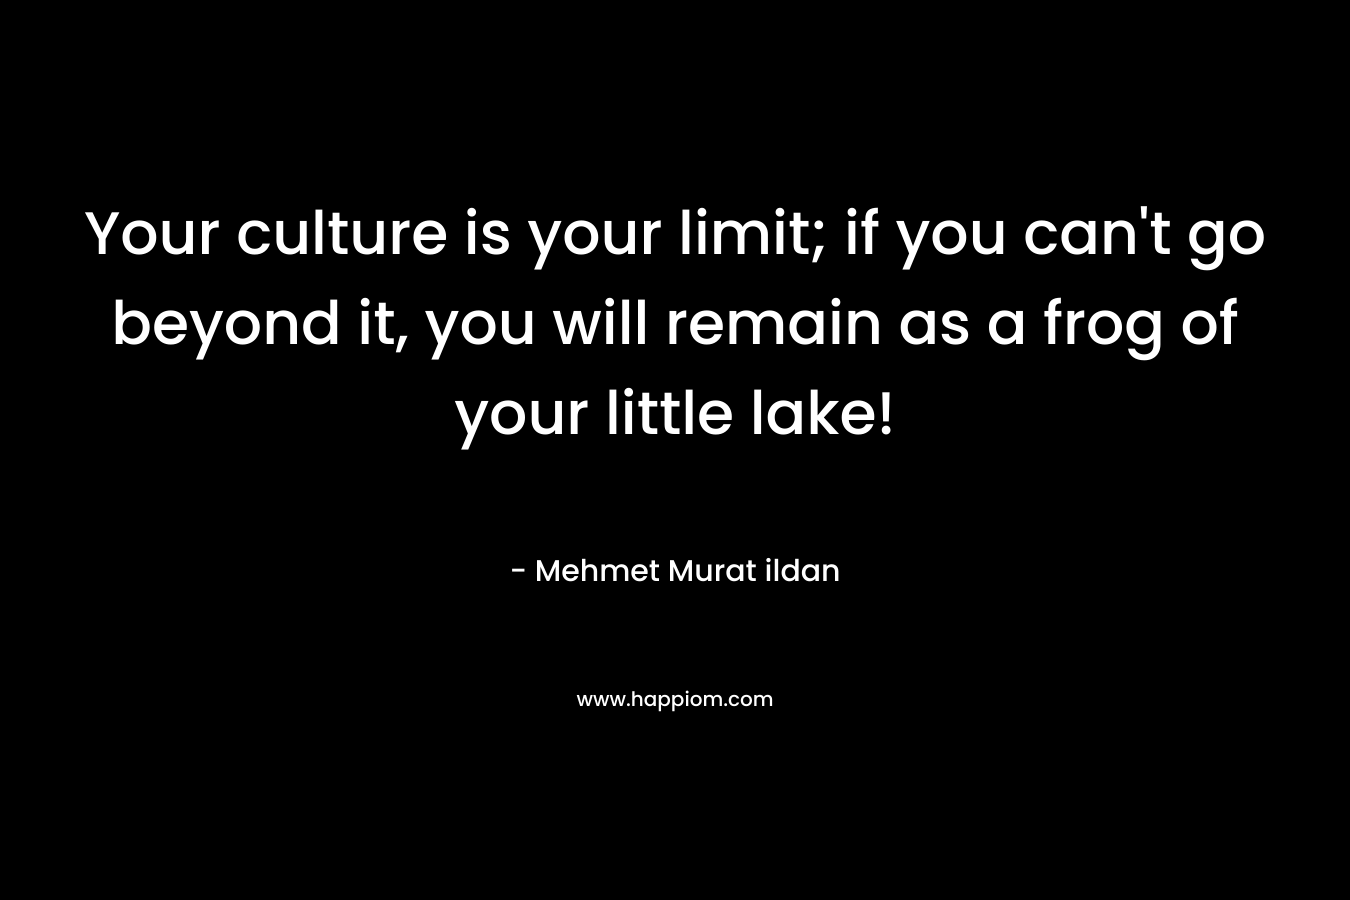 Your culture is your limit; if you can’t go beyond it, you will remain as a frog of your little lake! – Mehmet Murat ildan